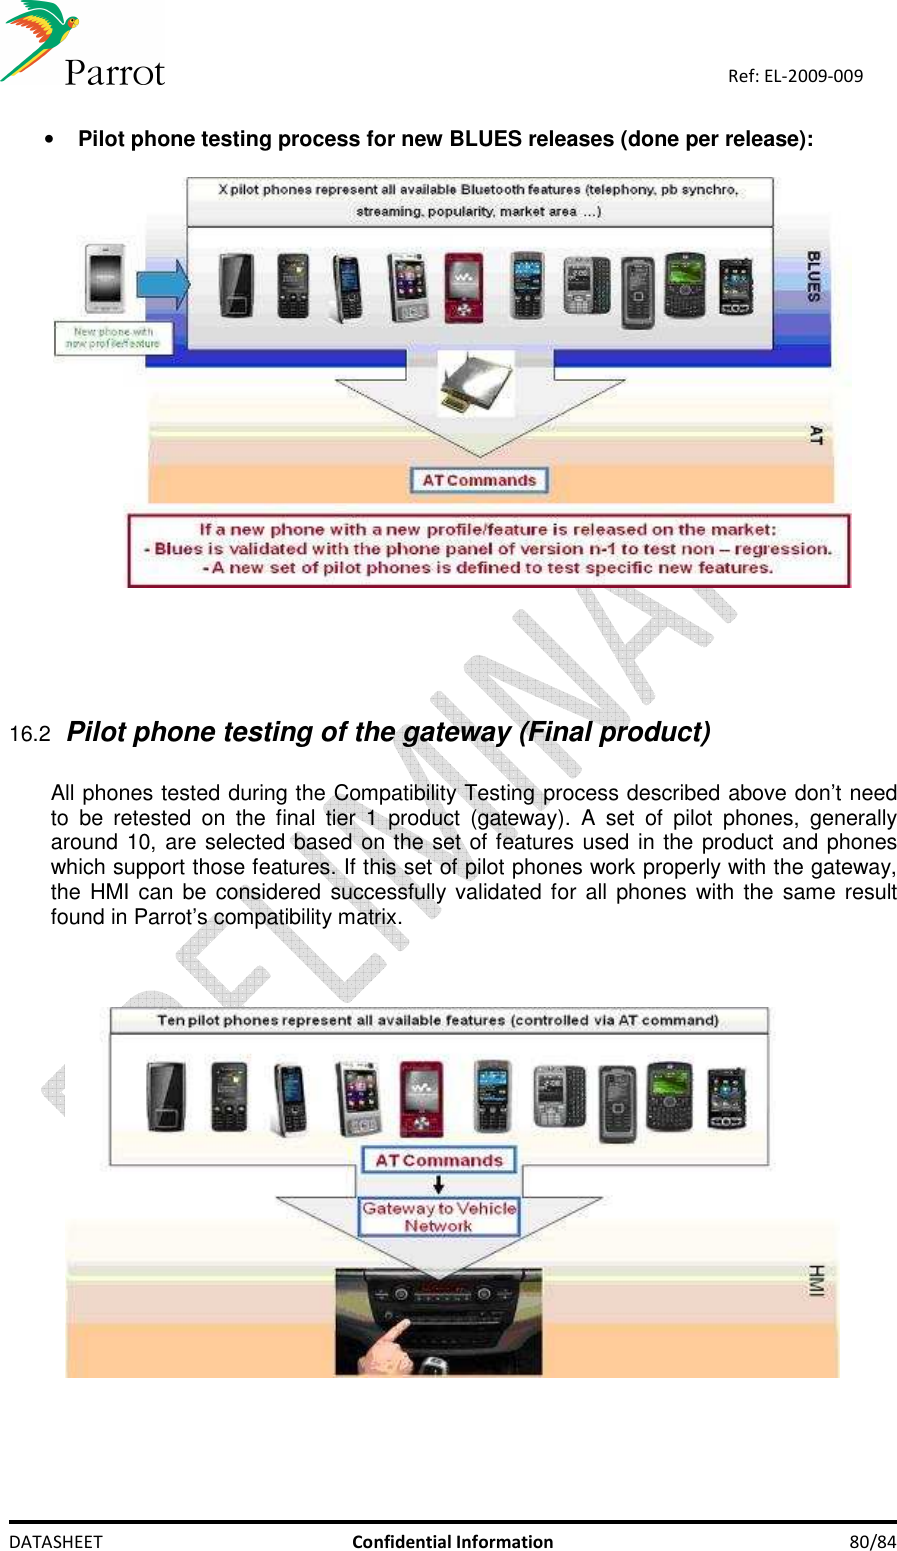    DATASHEET  Confidential Information  80/84 Ref: EL-2009-009  • Pilot phone testing process for new BLUES releases (done per release):       16.2 Pilot phone testing of the gateway (Final product)  All phones tested during the Compatibility Testing process described above don’t need to  be  retested  on  the  final  tier  1  product  (gateway).  A  set  of  pilot  phones,  generally around 10, are selected based on the set of features used in the product and phones which support those features. If this set of pilot phones work properly with the gateway, the HMI can be  considered successfully validated for all phones with the same result found in Parrot’s compatibility matrix.          